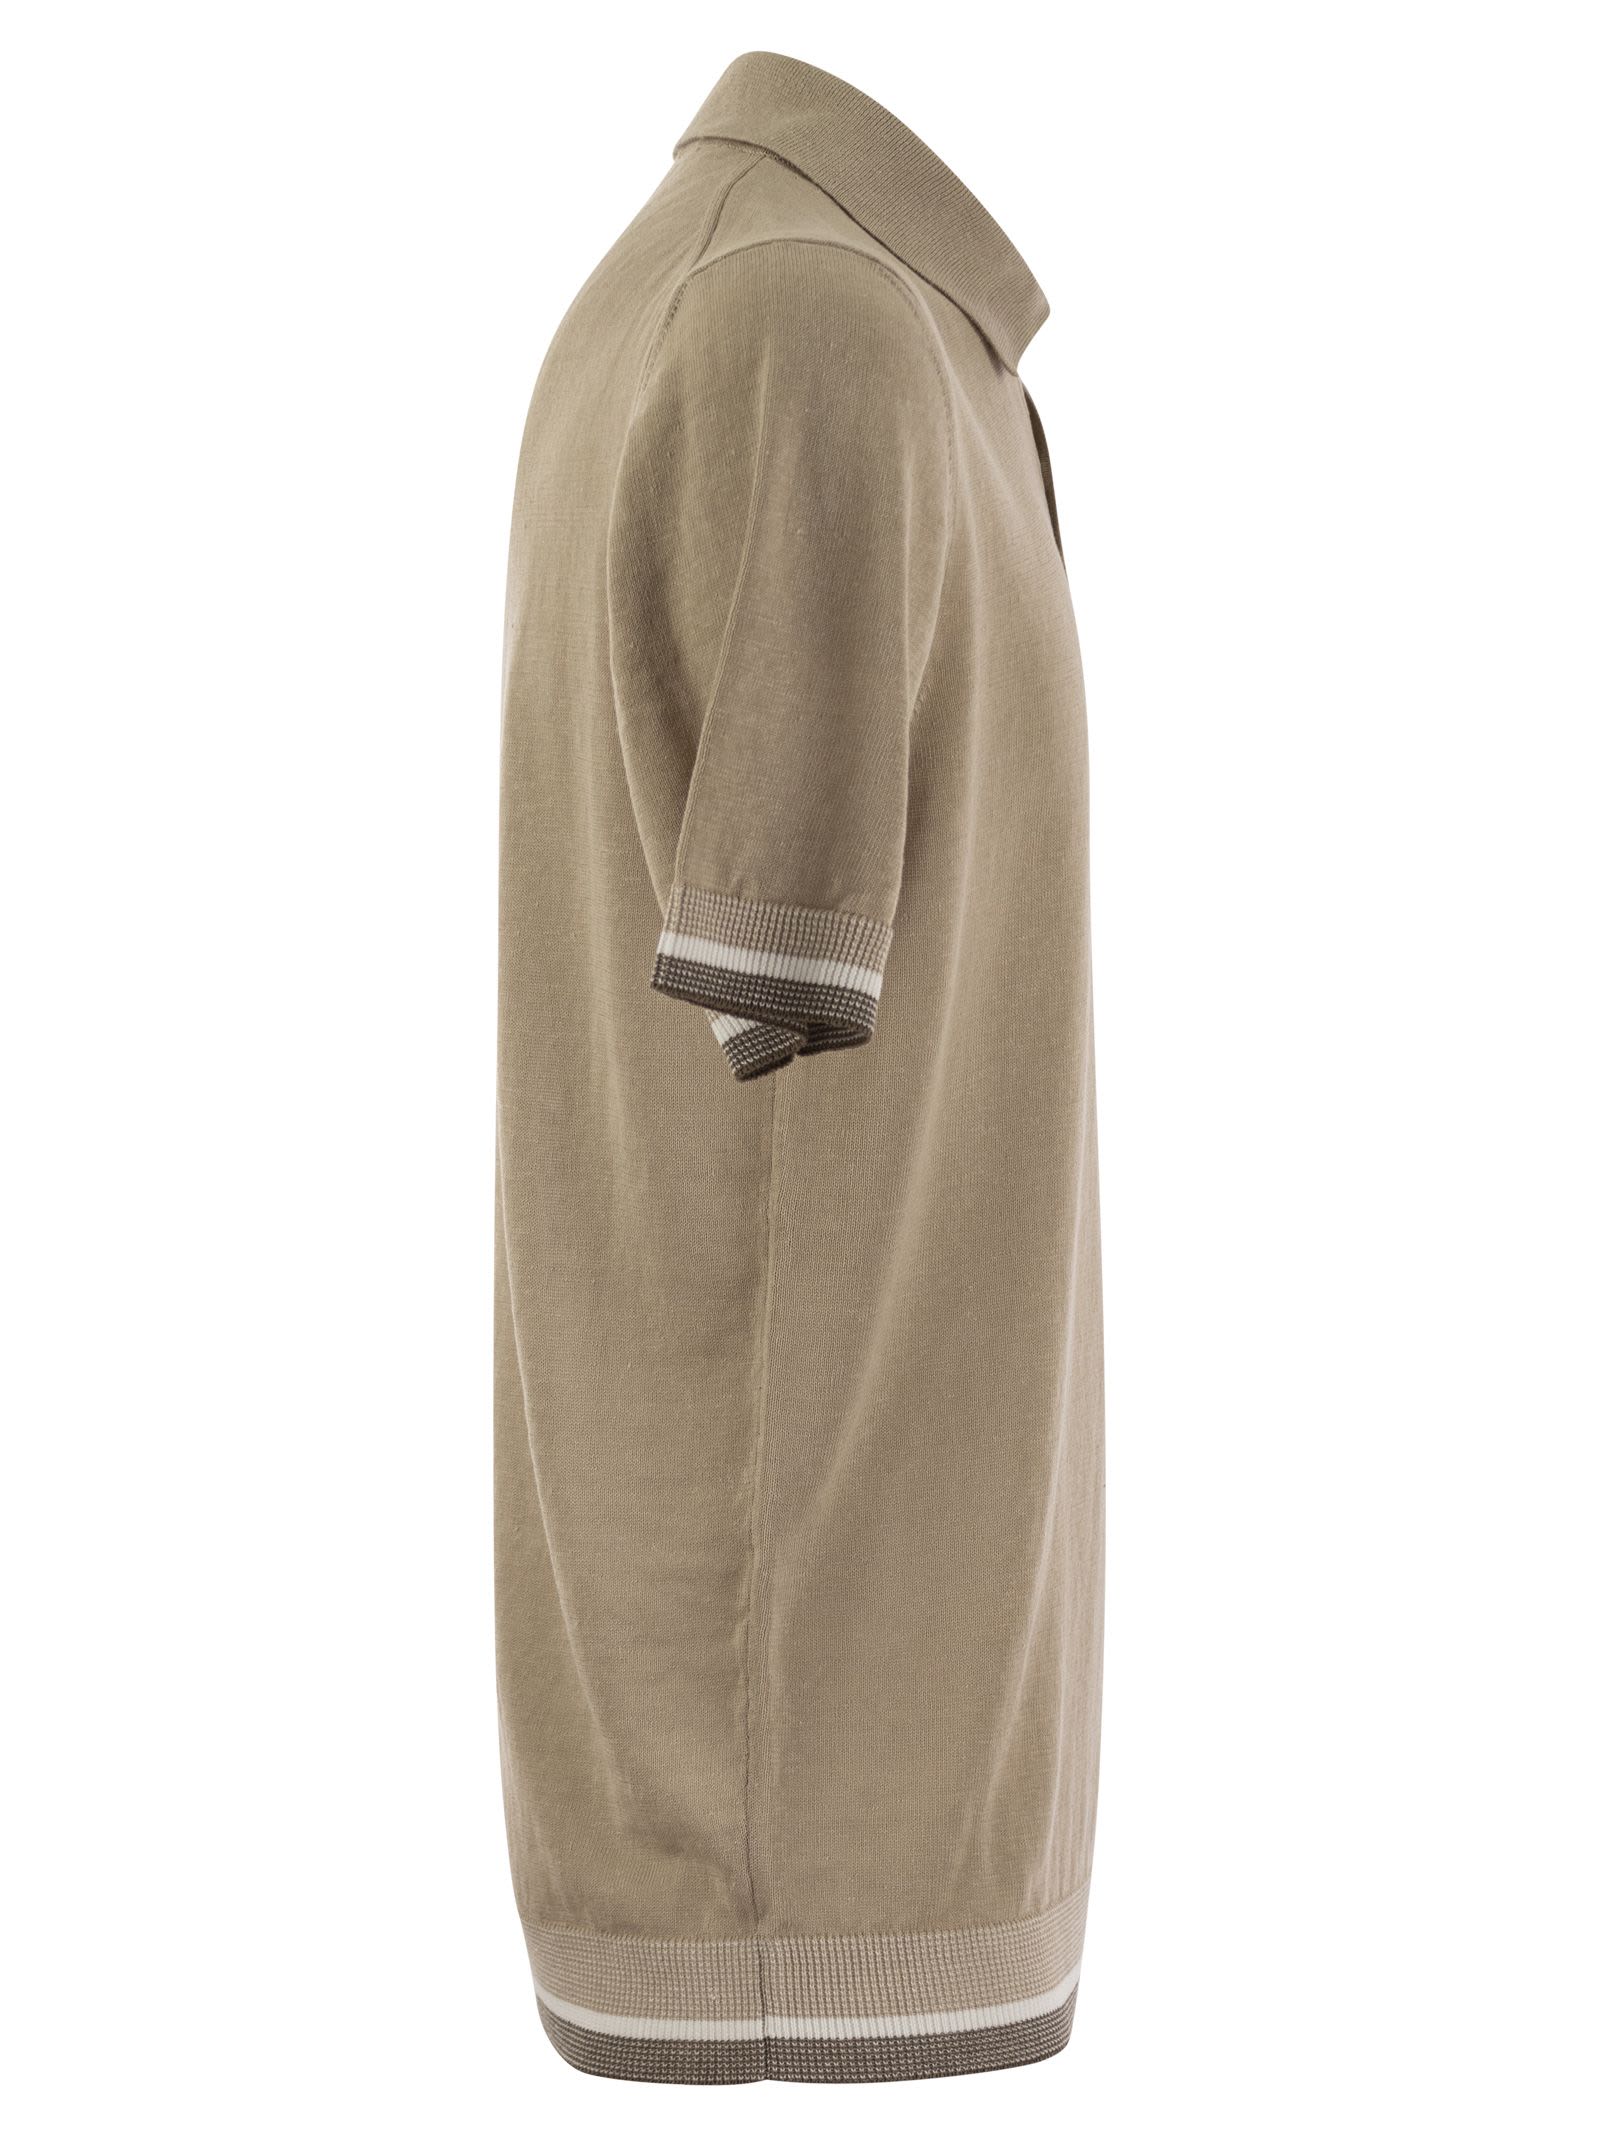 Shop Peserico Linen And Cotton Yarn Jersey In Beige